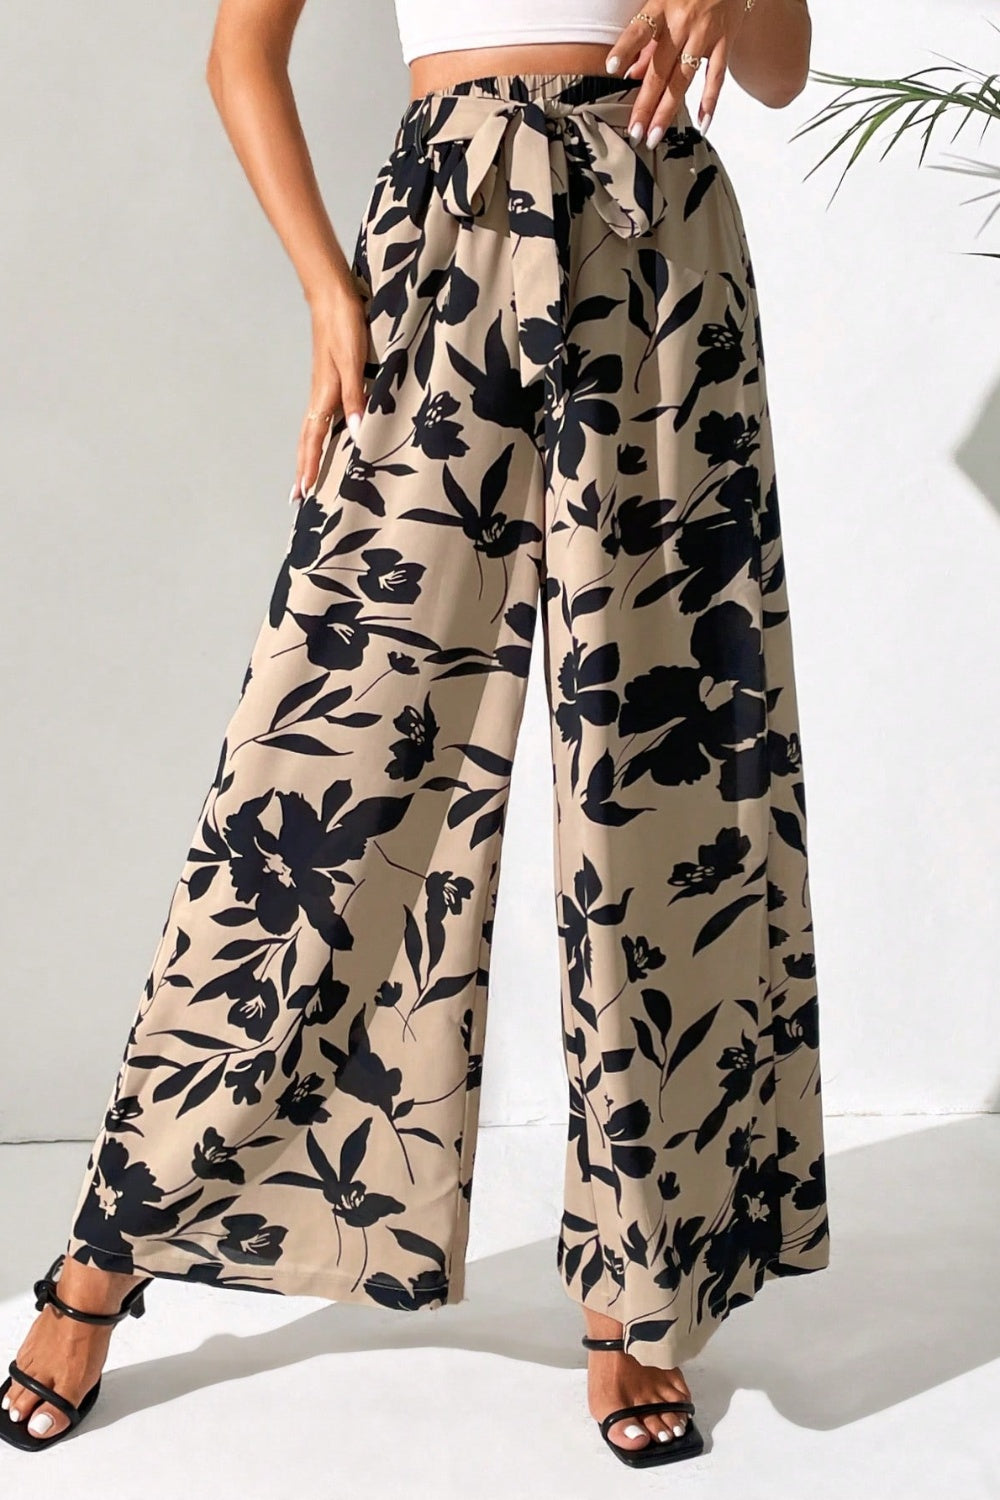 Upgrade your style effortlessly with our Printed Tied Wide Leg Pants. Chic, comfortable, and versatile - perfect for any occasion. Shop now!